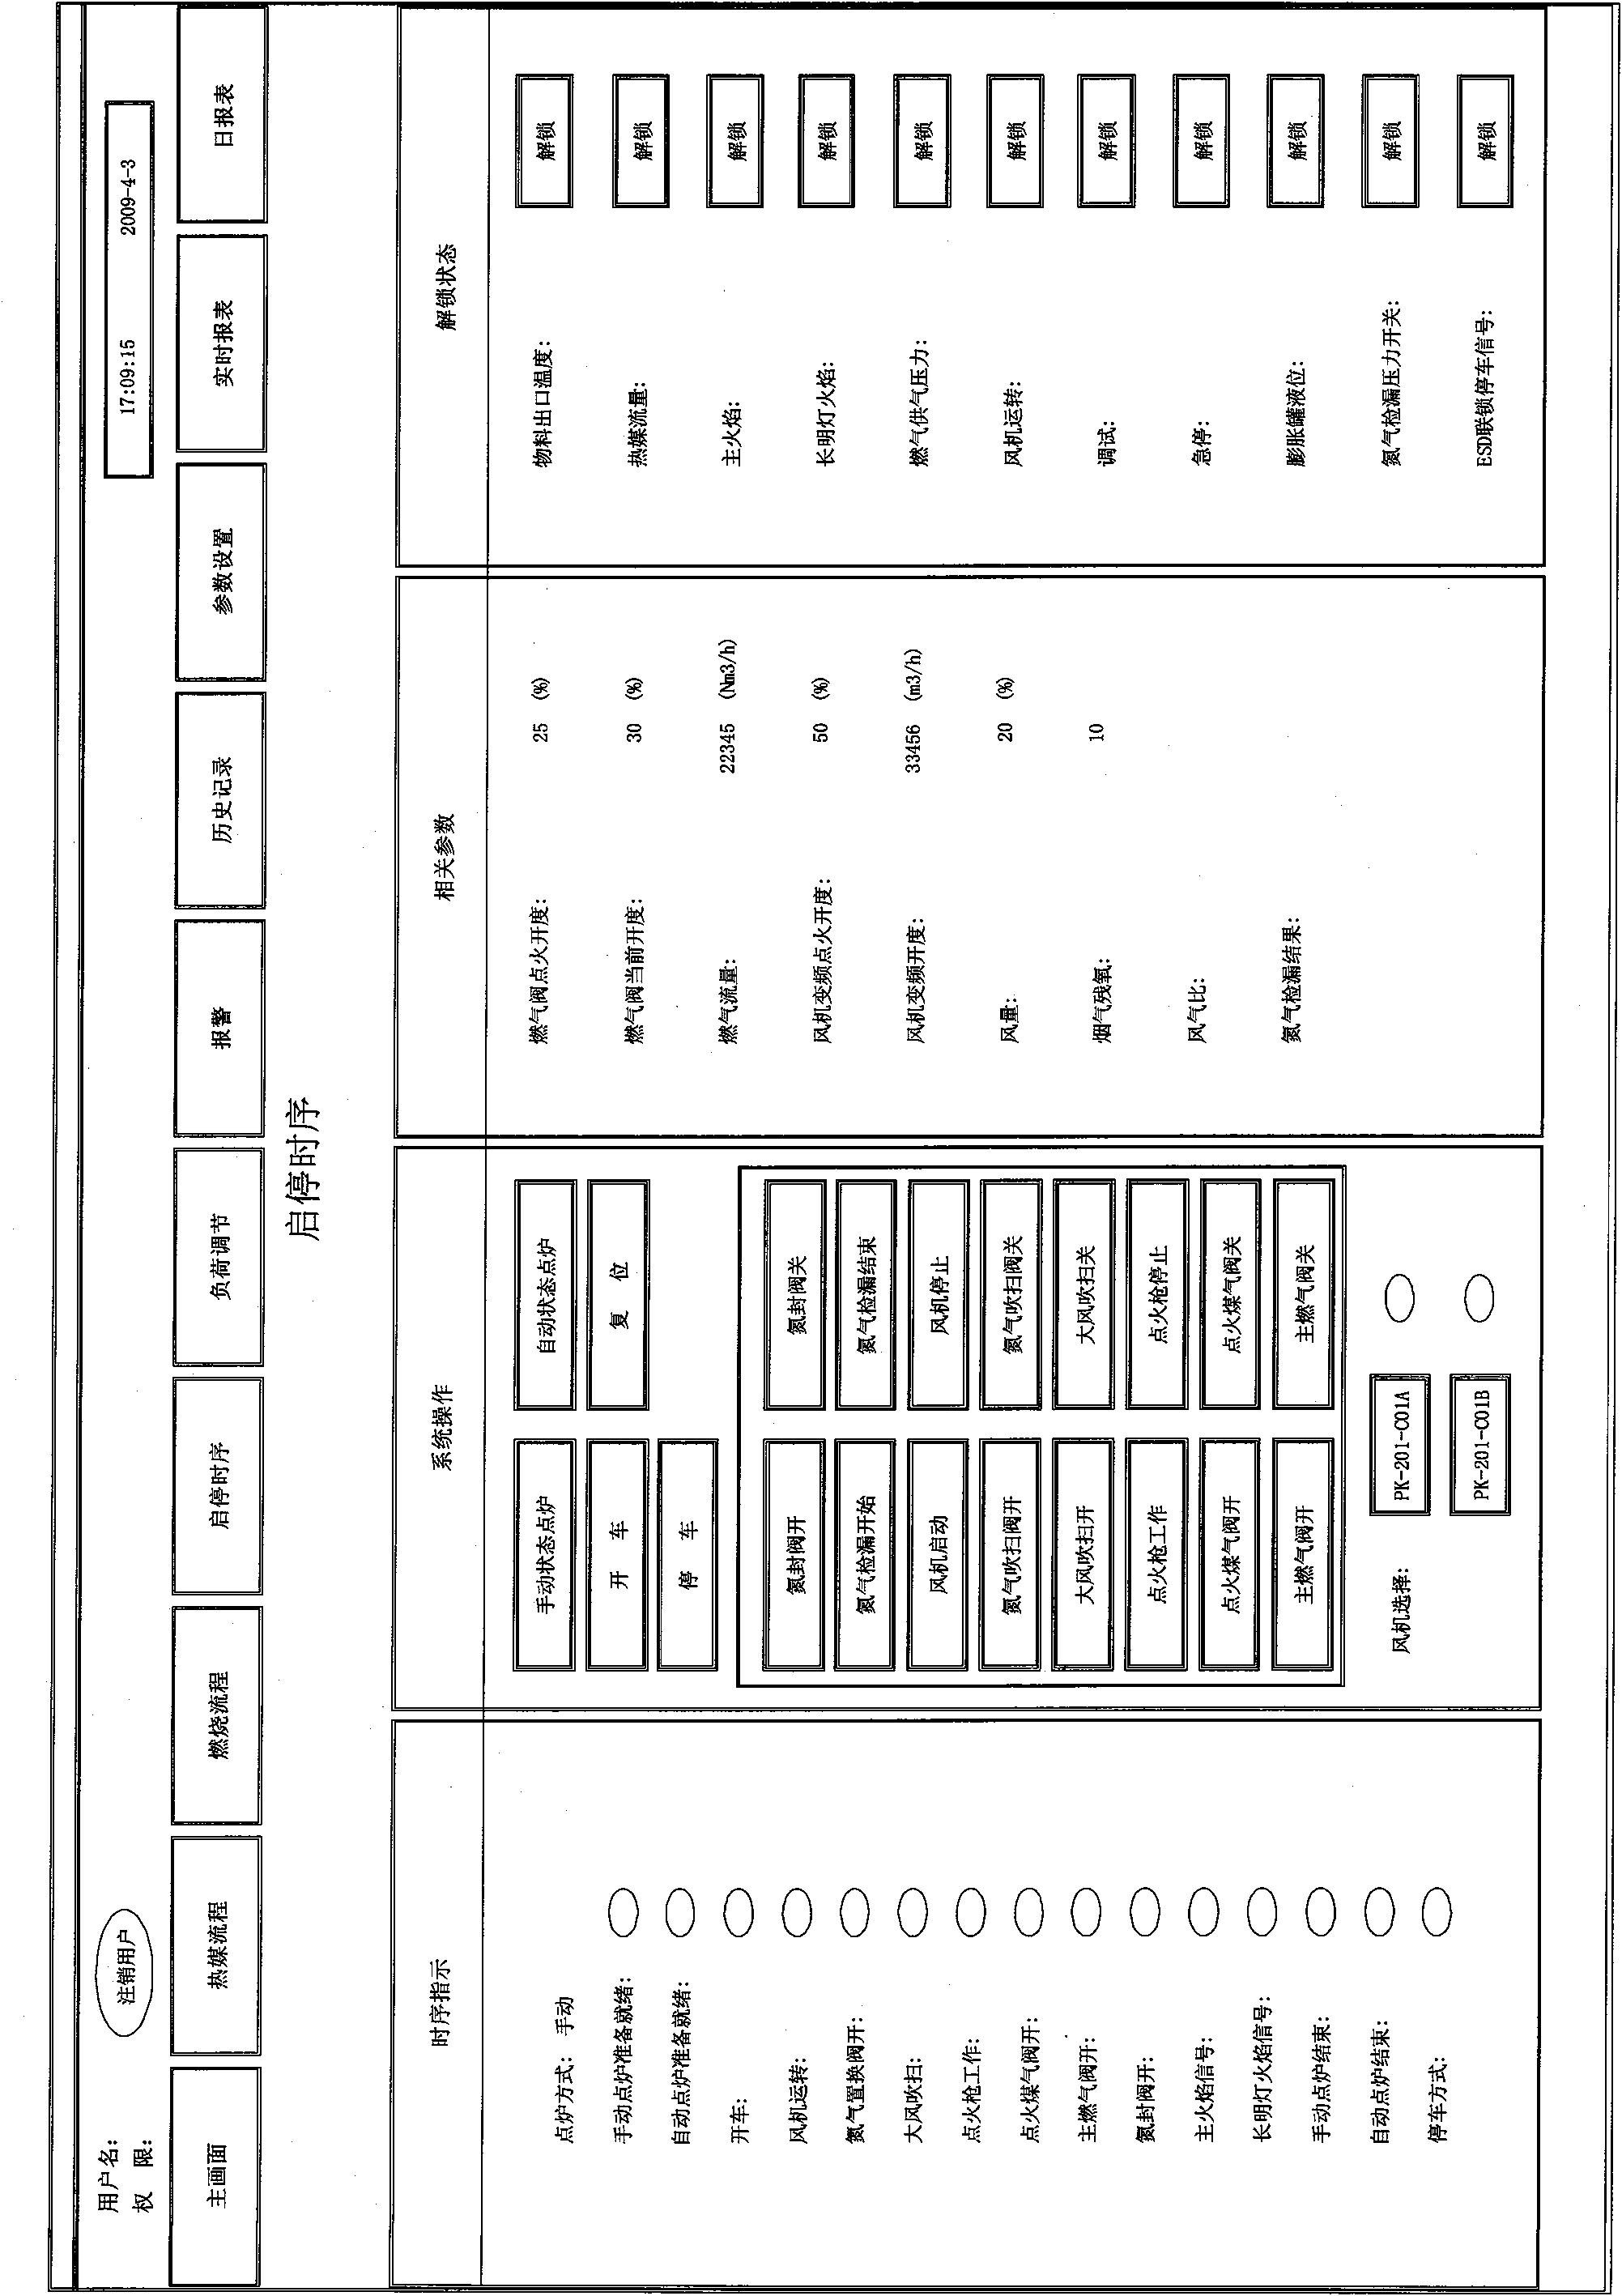 General configuration software control system